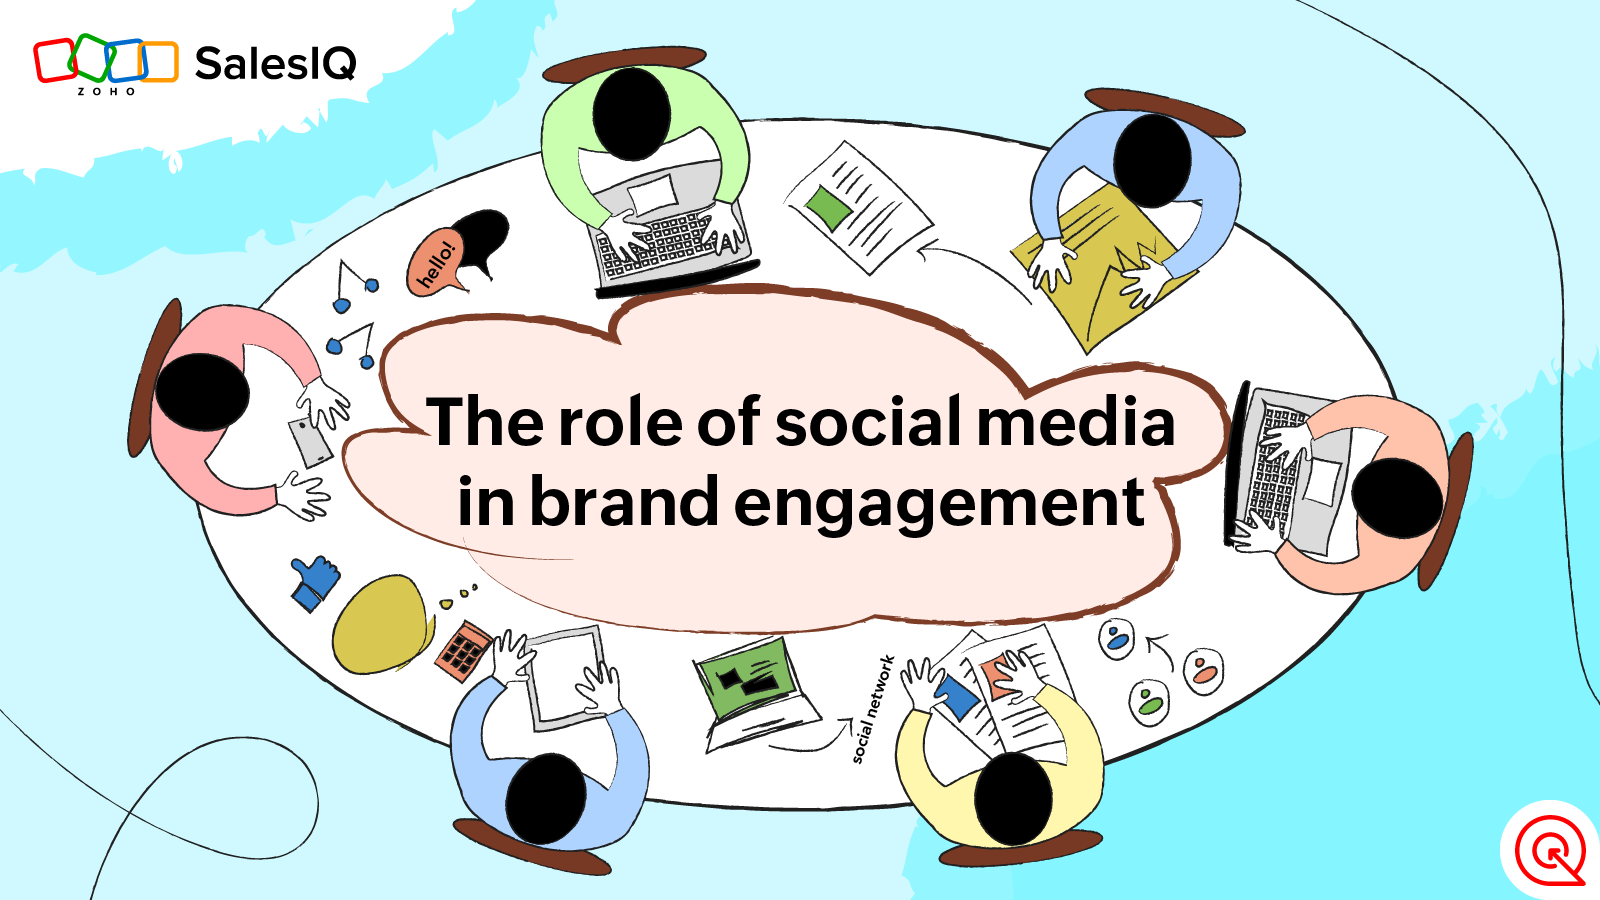 The role of social media in brand engagement | Zoho SalesIQ